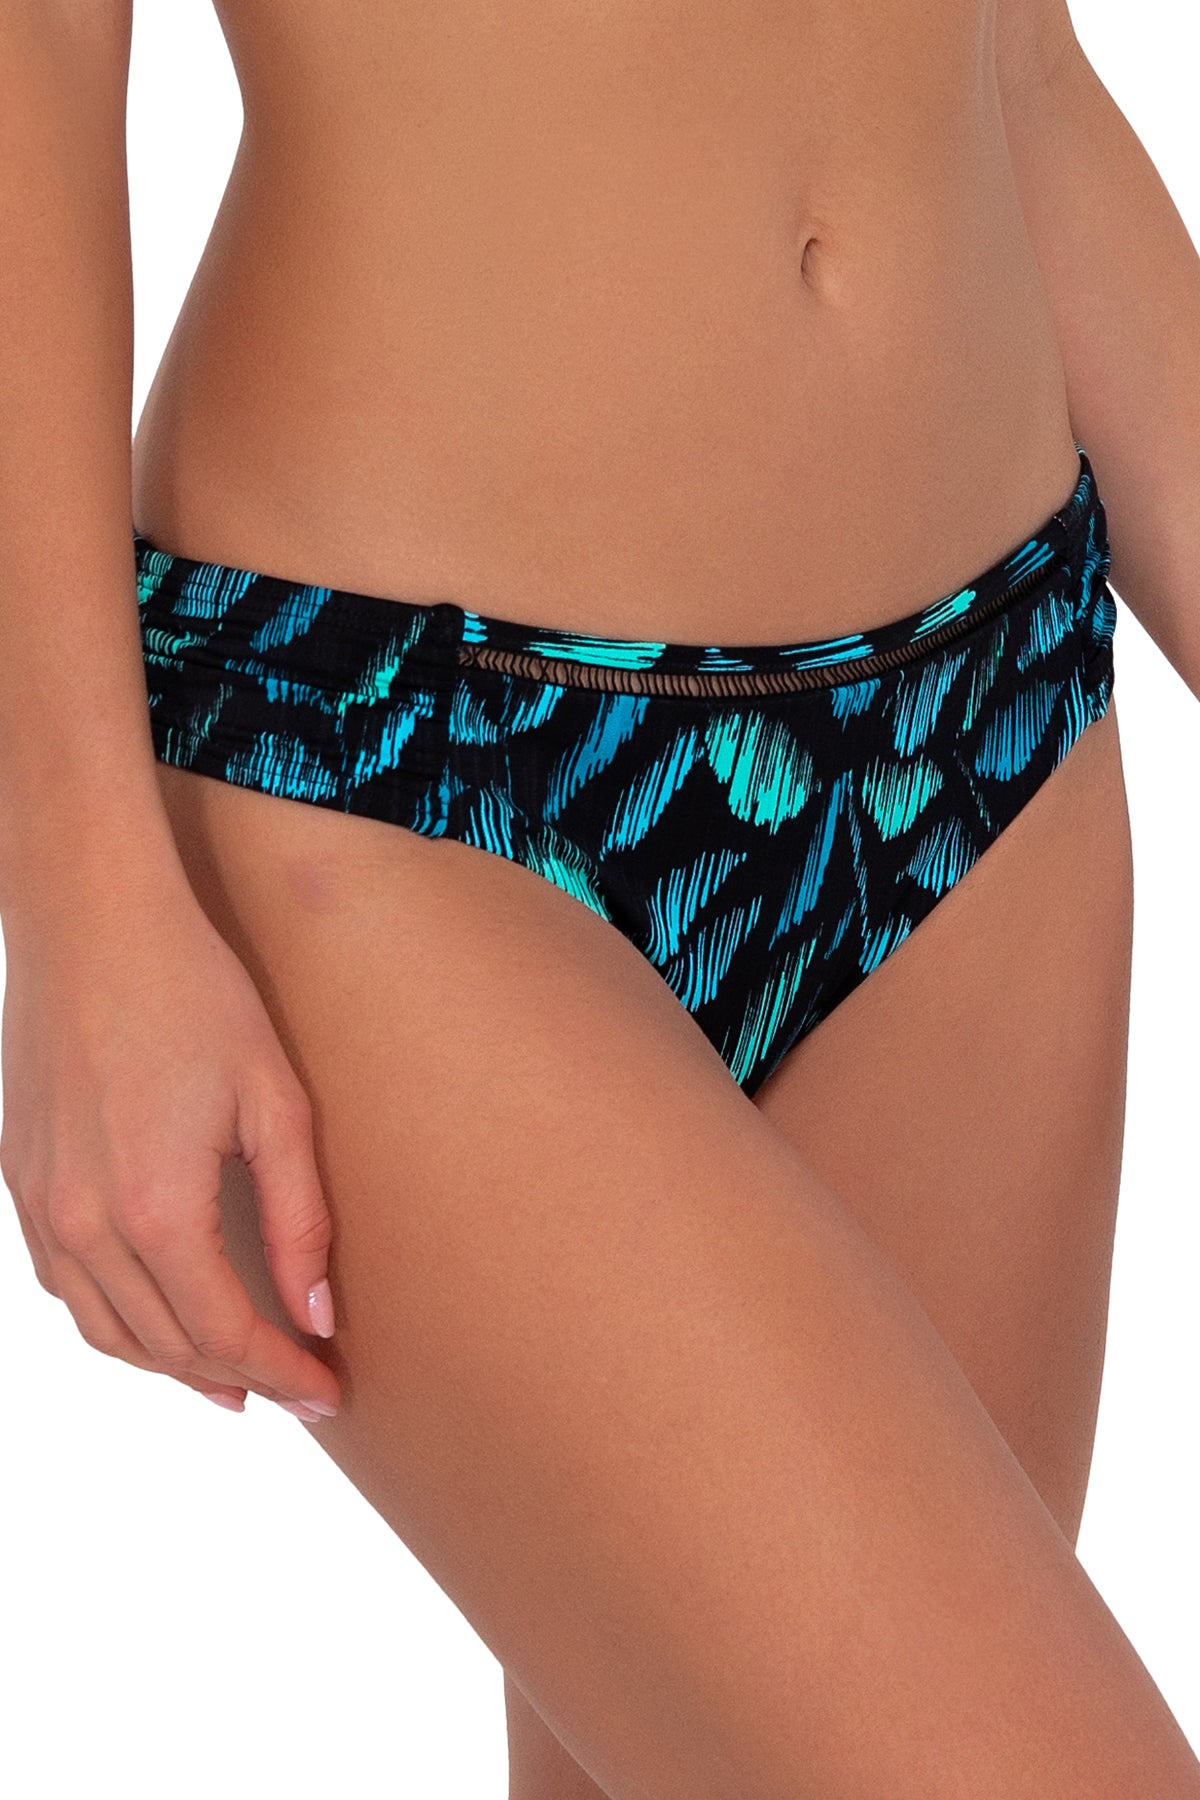 Side pose #1 of Gigi wearing Sunsets Cascade Seagrass Texture Audra Hipster Bottom